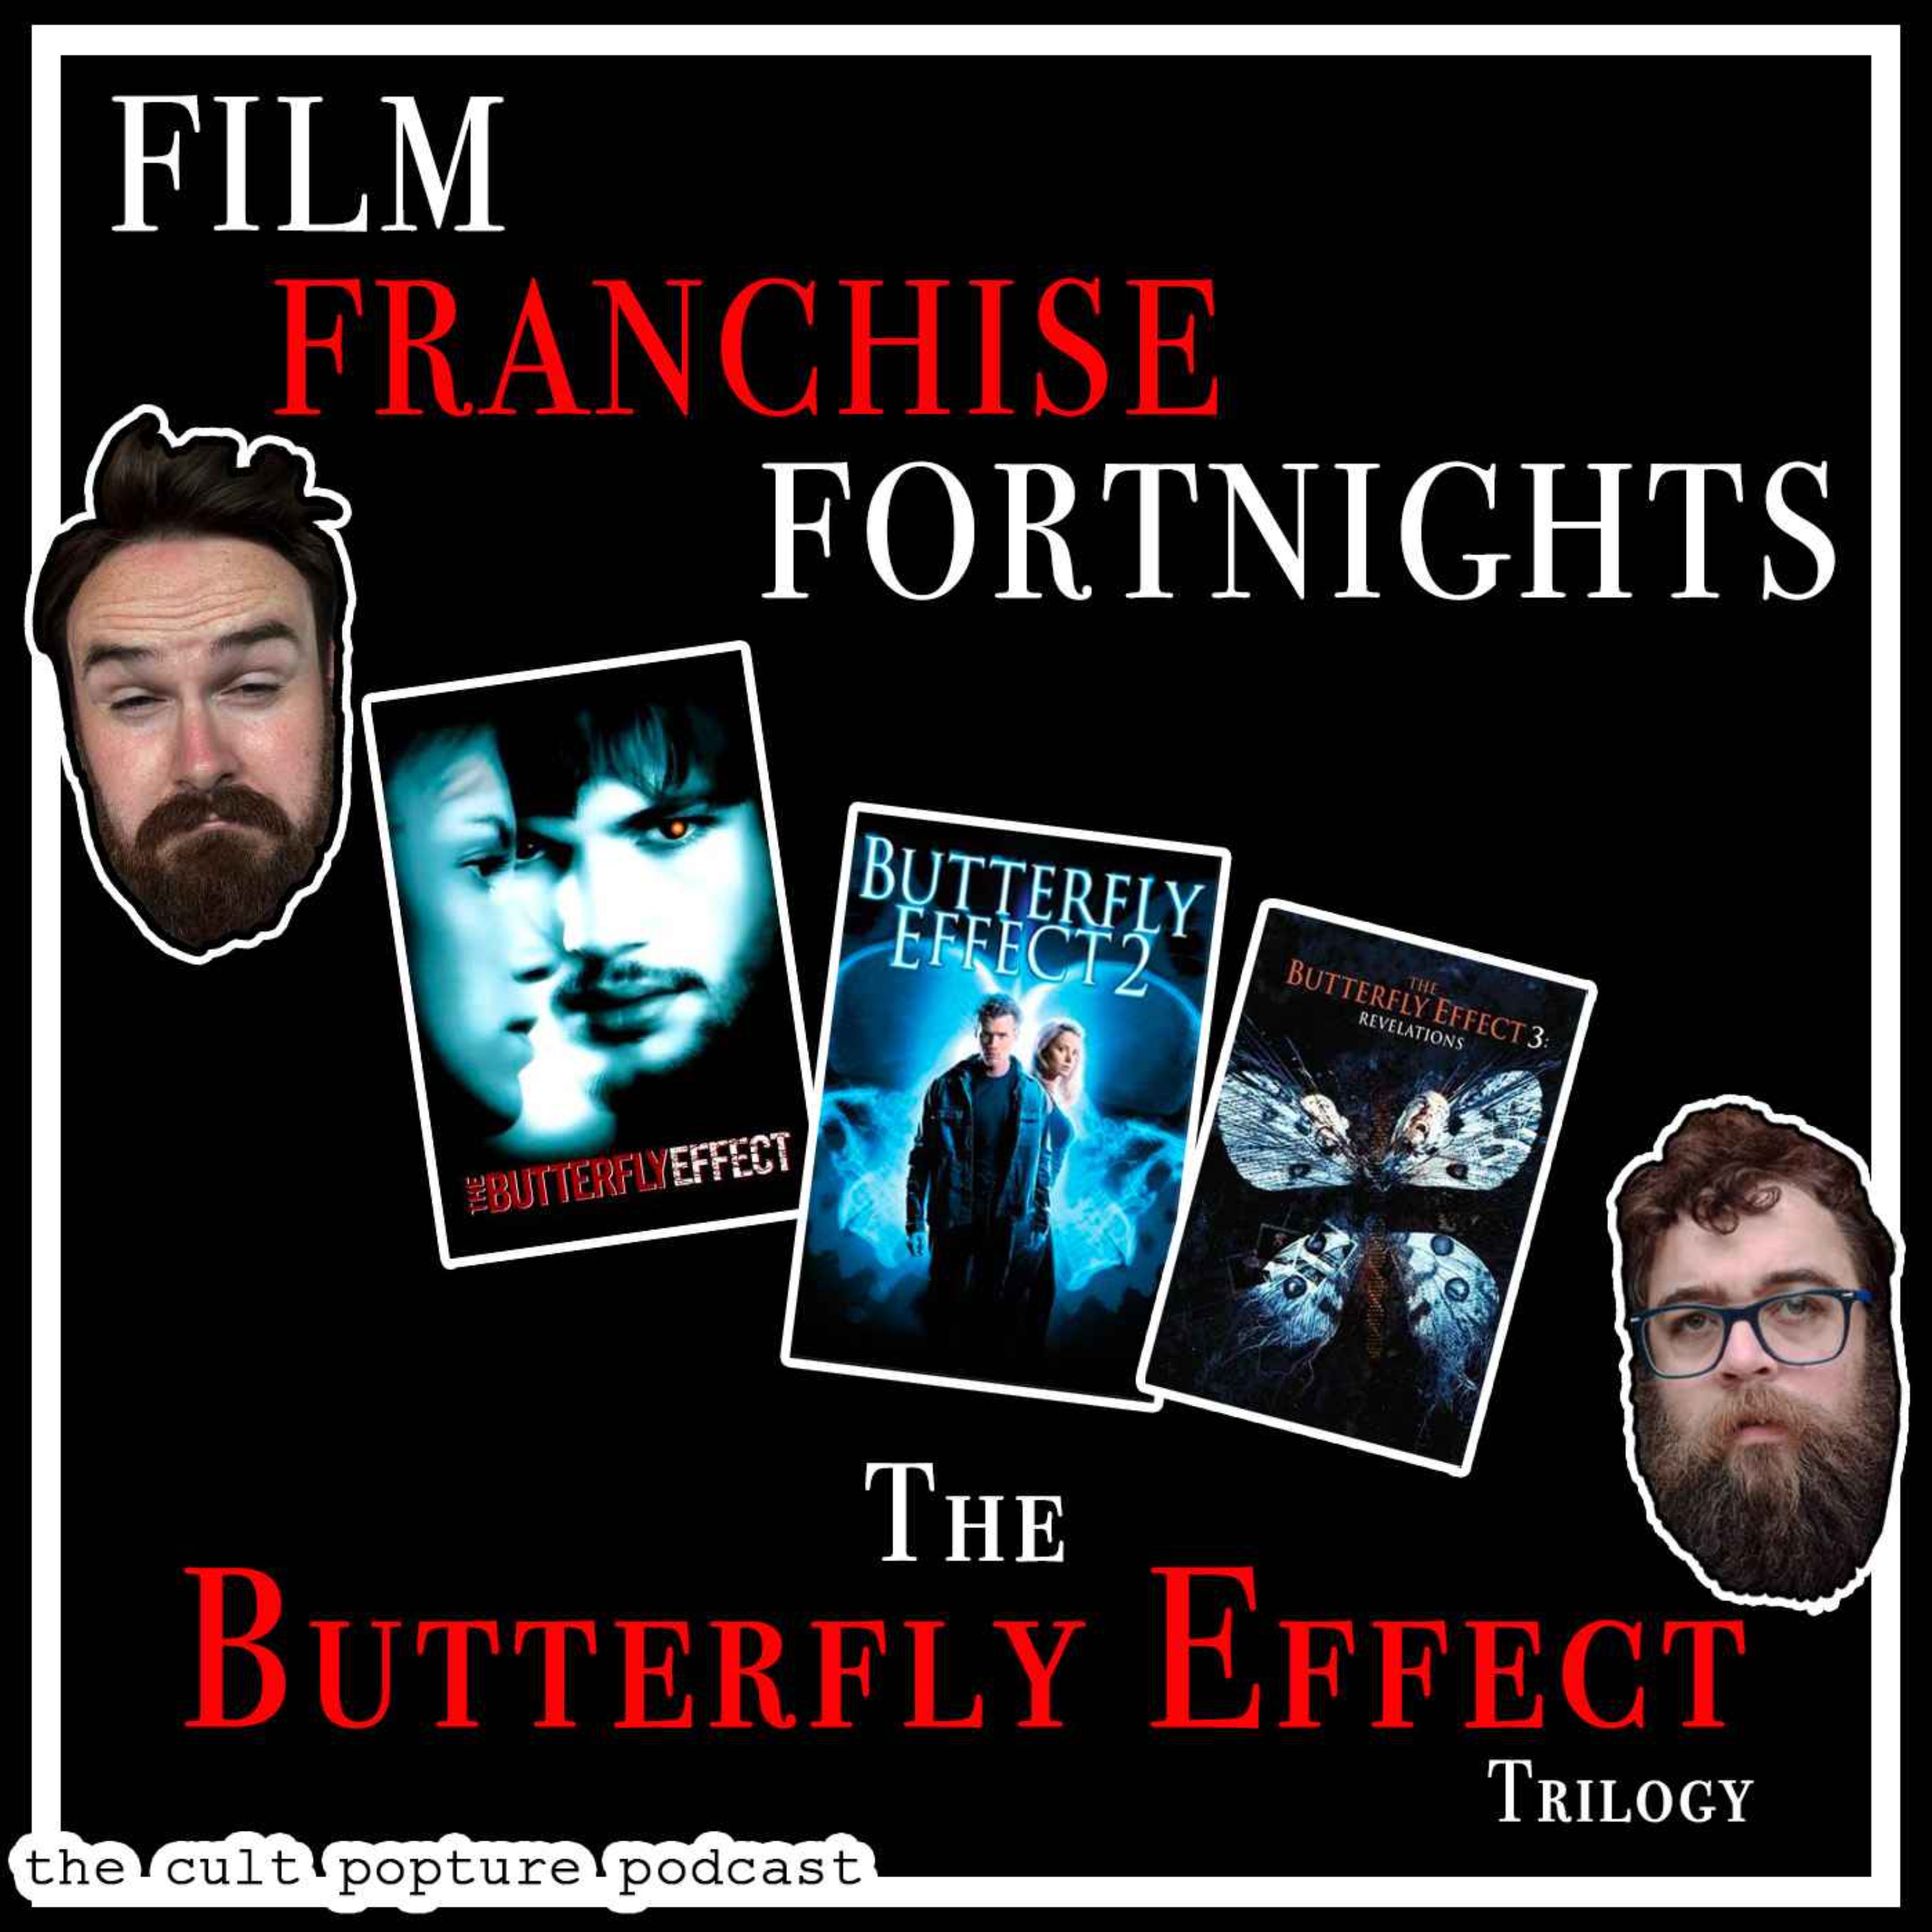 ”The Butterfly Effect” Trilogy | Film Franchise Fortnights